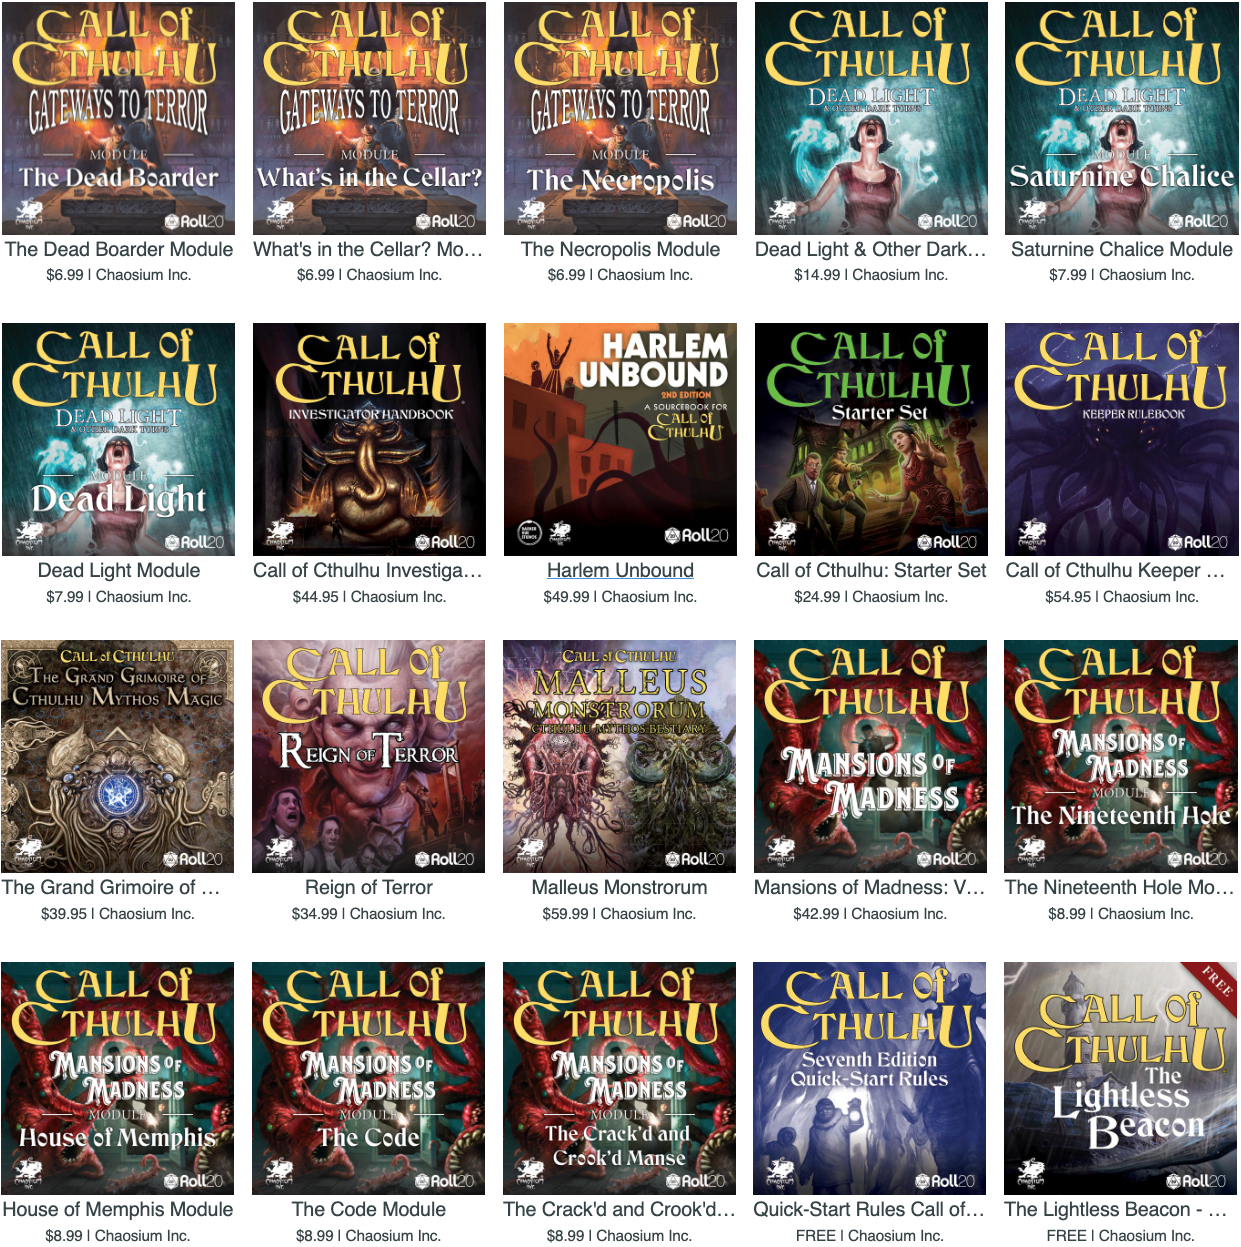 Call of Cthulhu titles on Roll20